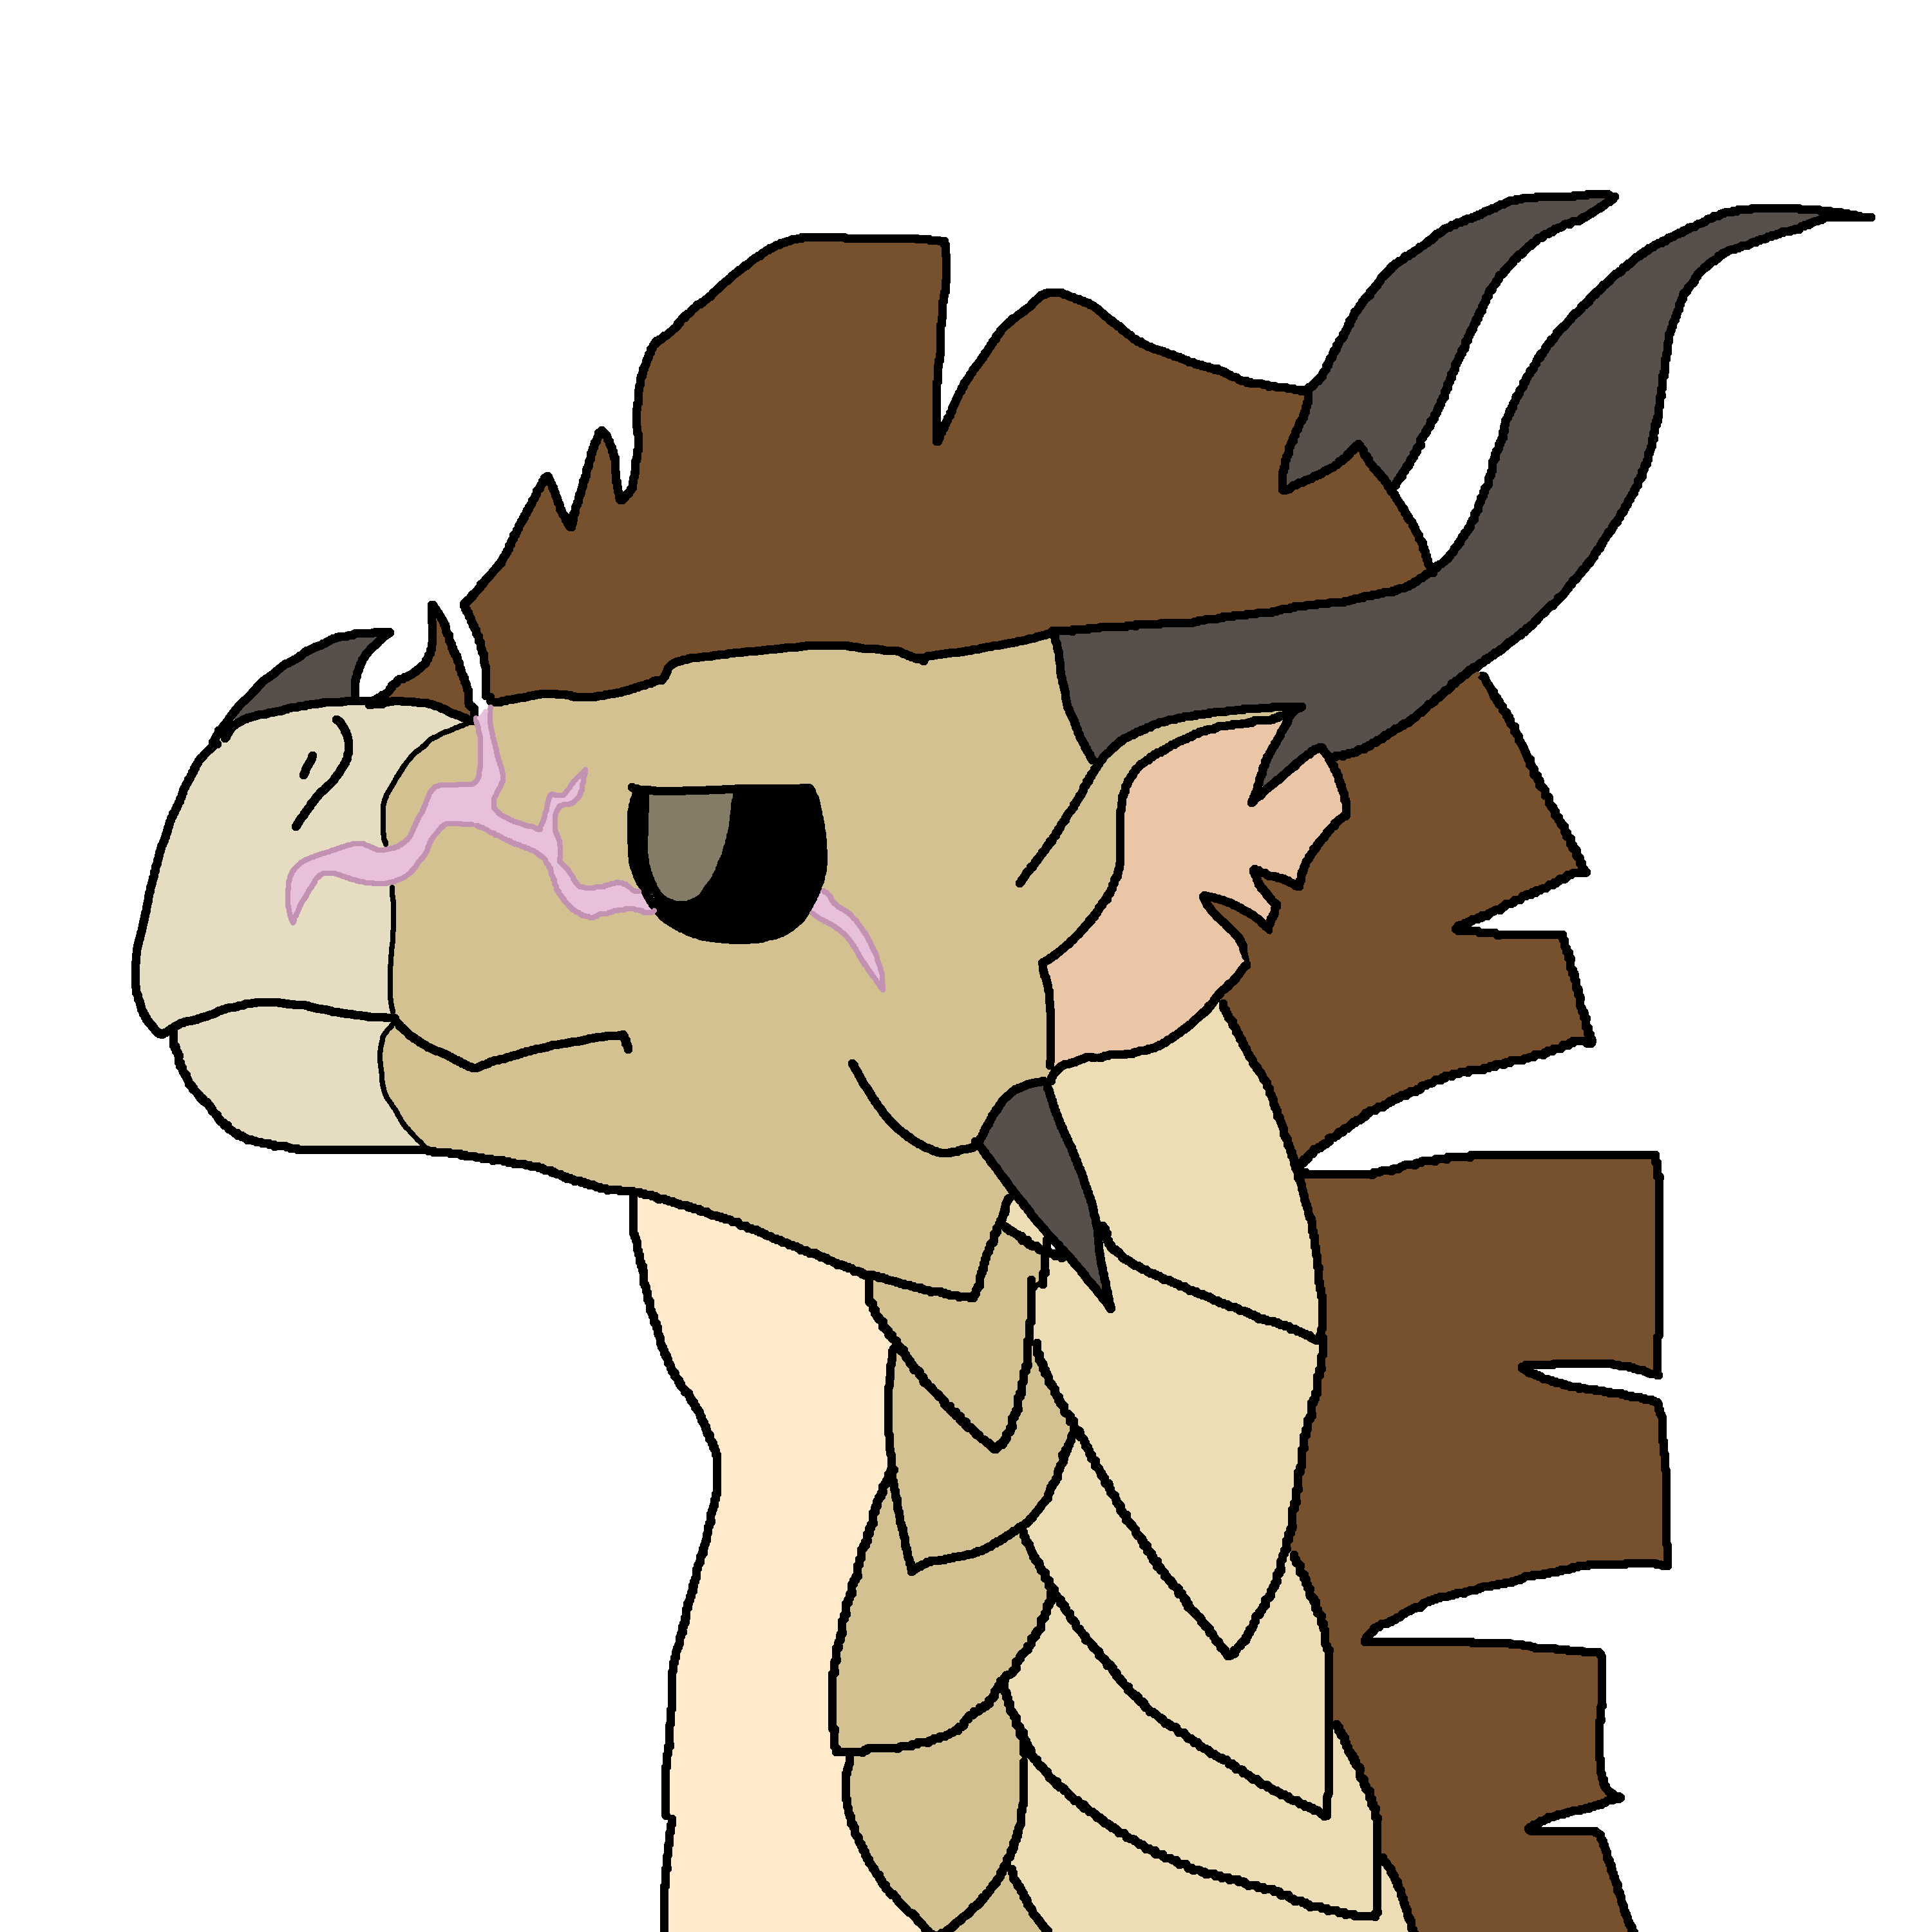 Drawing/giving a design to every wof character- Addax | Fandom